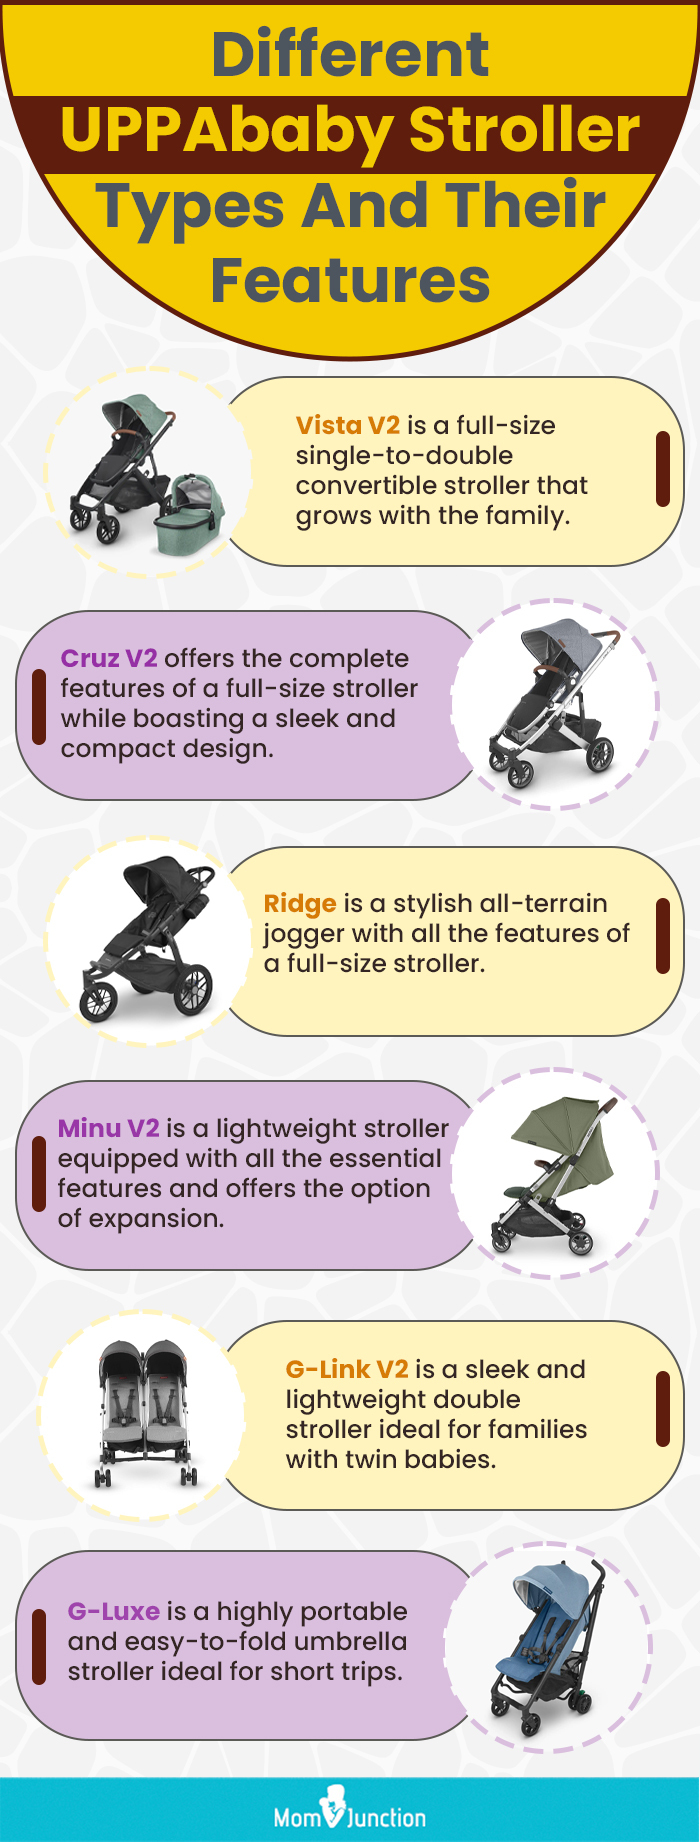 Different UPPAbaby Stroller Types And Their Features (infographic)